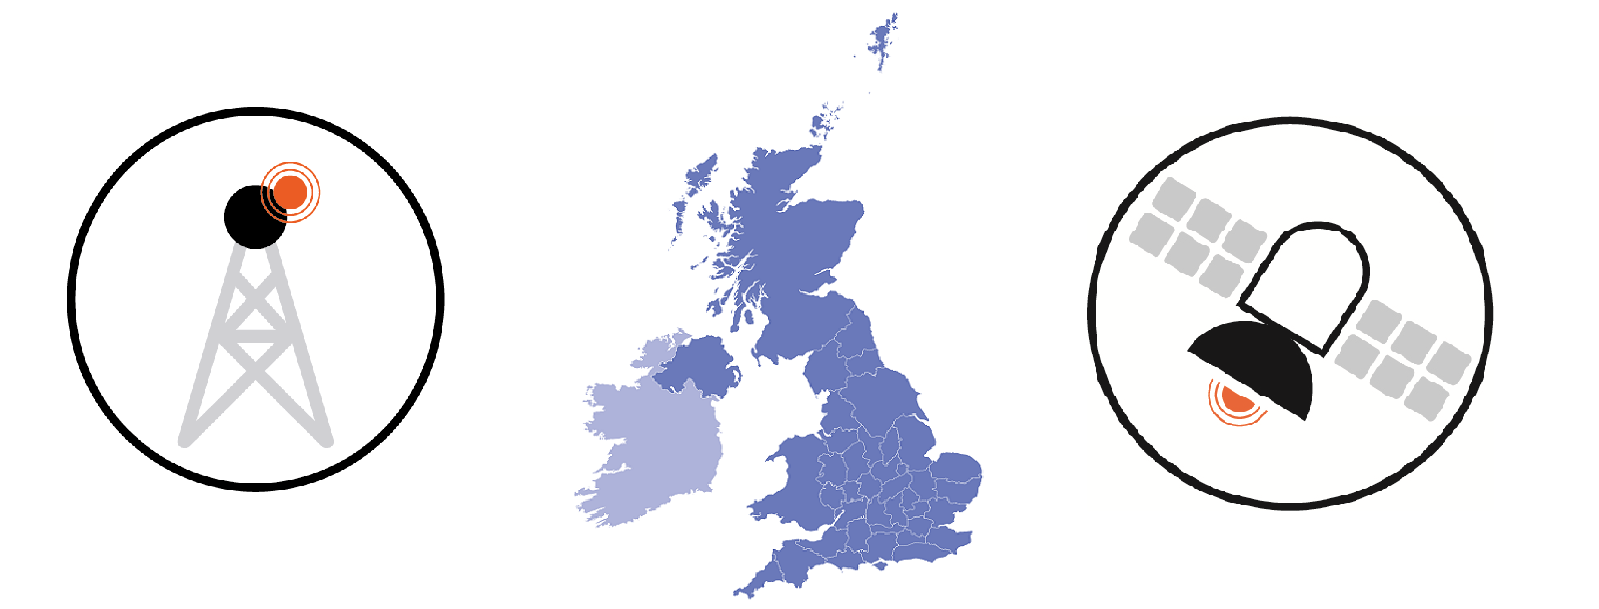 Illustration showing a mobile phone mast, a communication satellite and a map of the UK to infer that mobile phone coverage does not cover the whole of the UK.